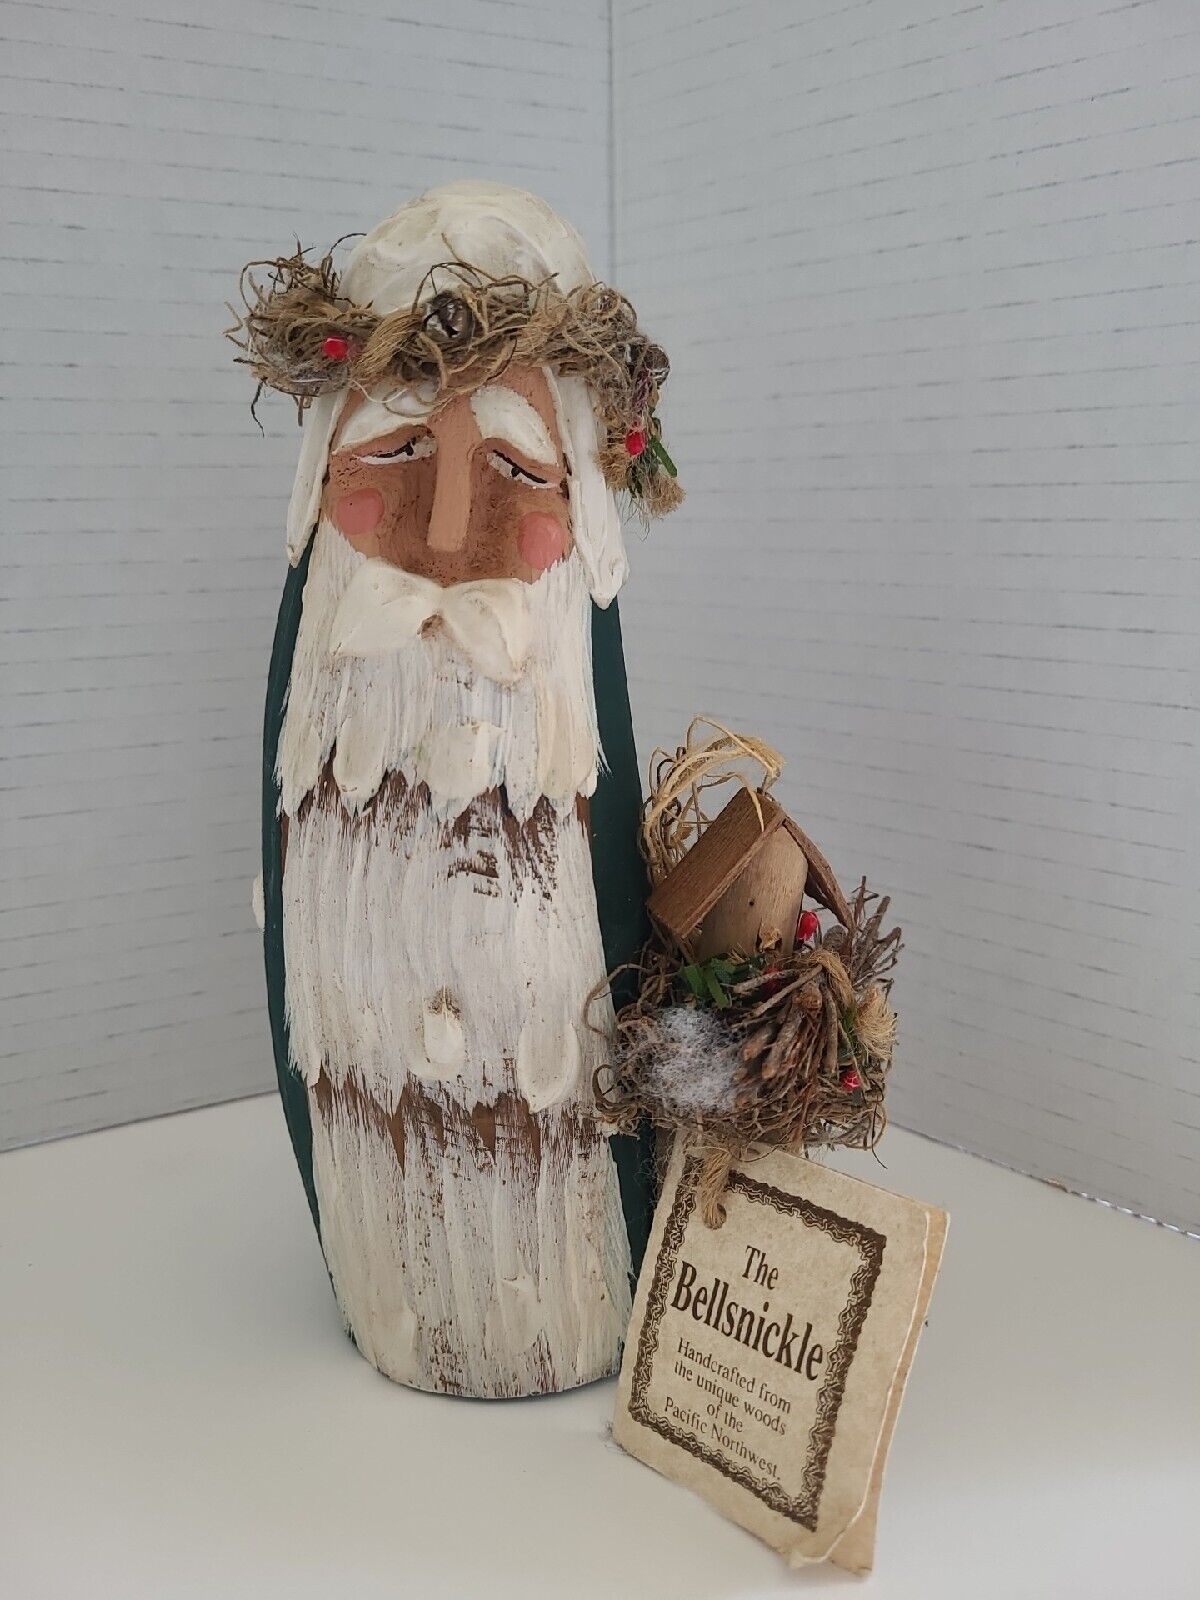 Handcrafted Carved Wood Santa - Made From Wood Of The Pacific NW In Astoria, OR